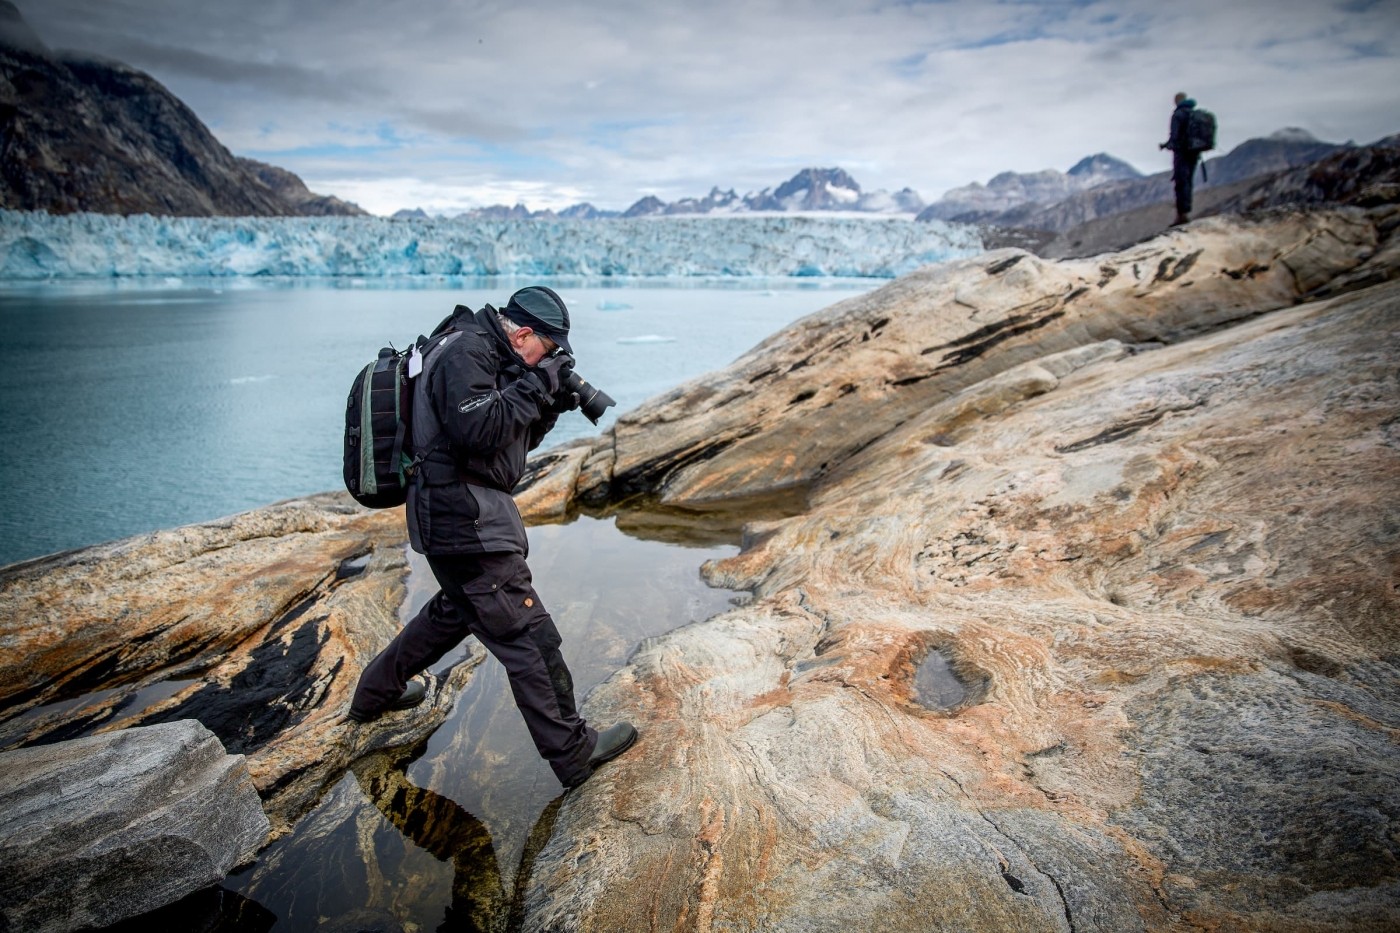 A photographer focusing on rock lines and details near the Knud Rasmussen glacier in East Greenland. By Mads Pihl